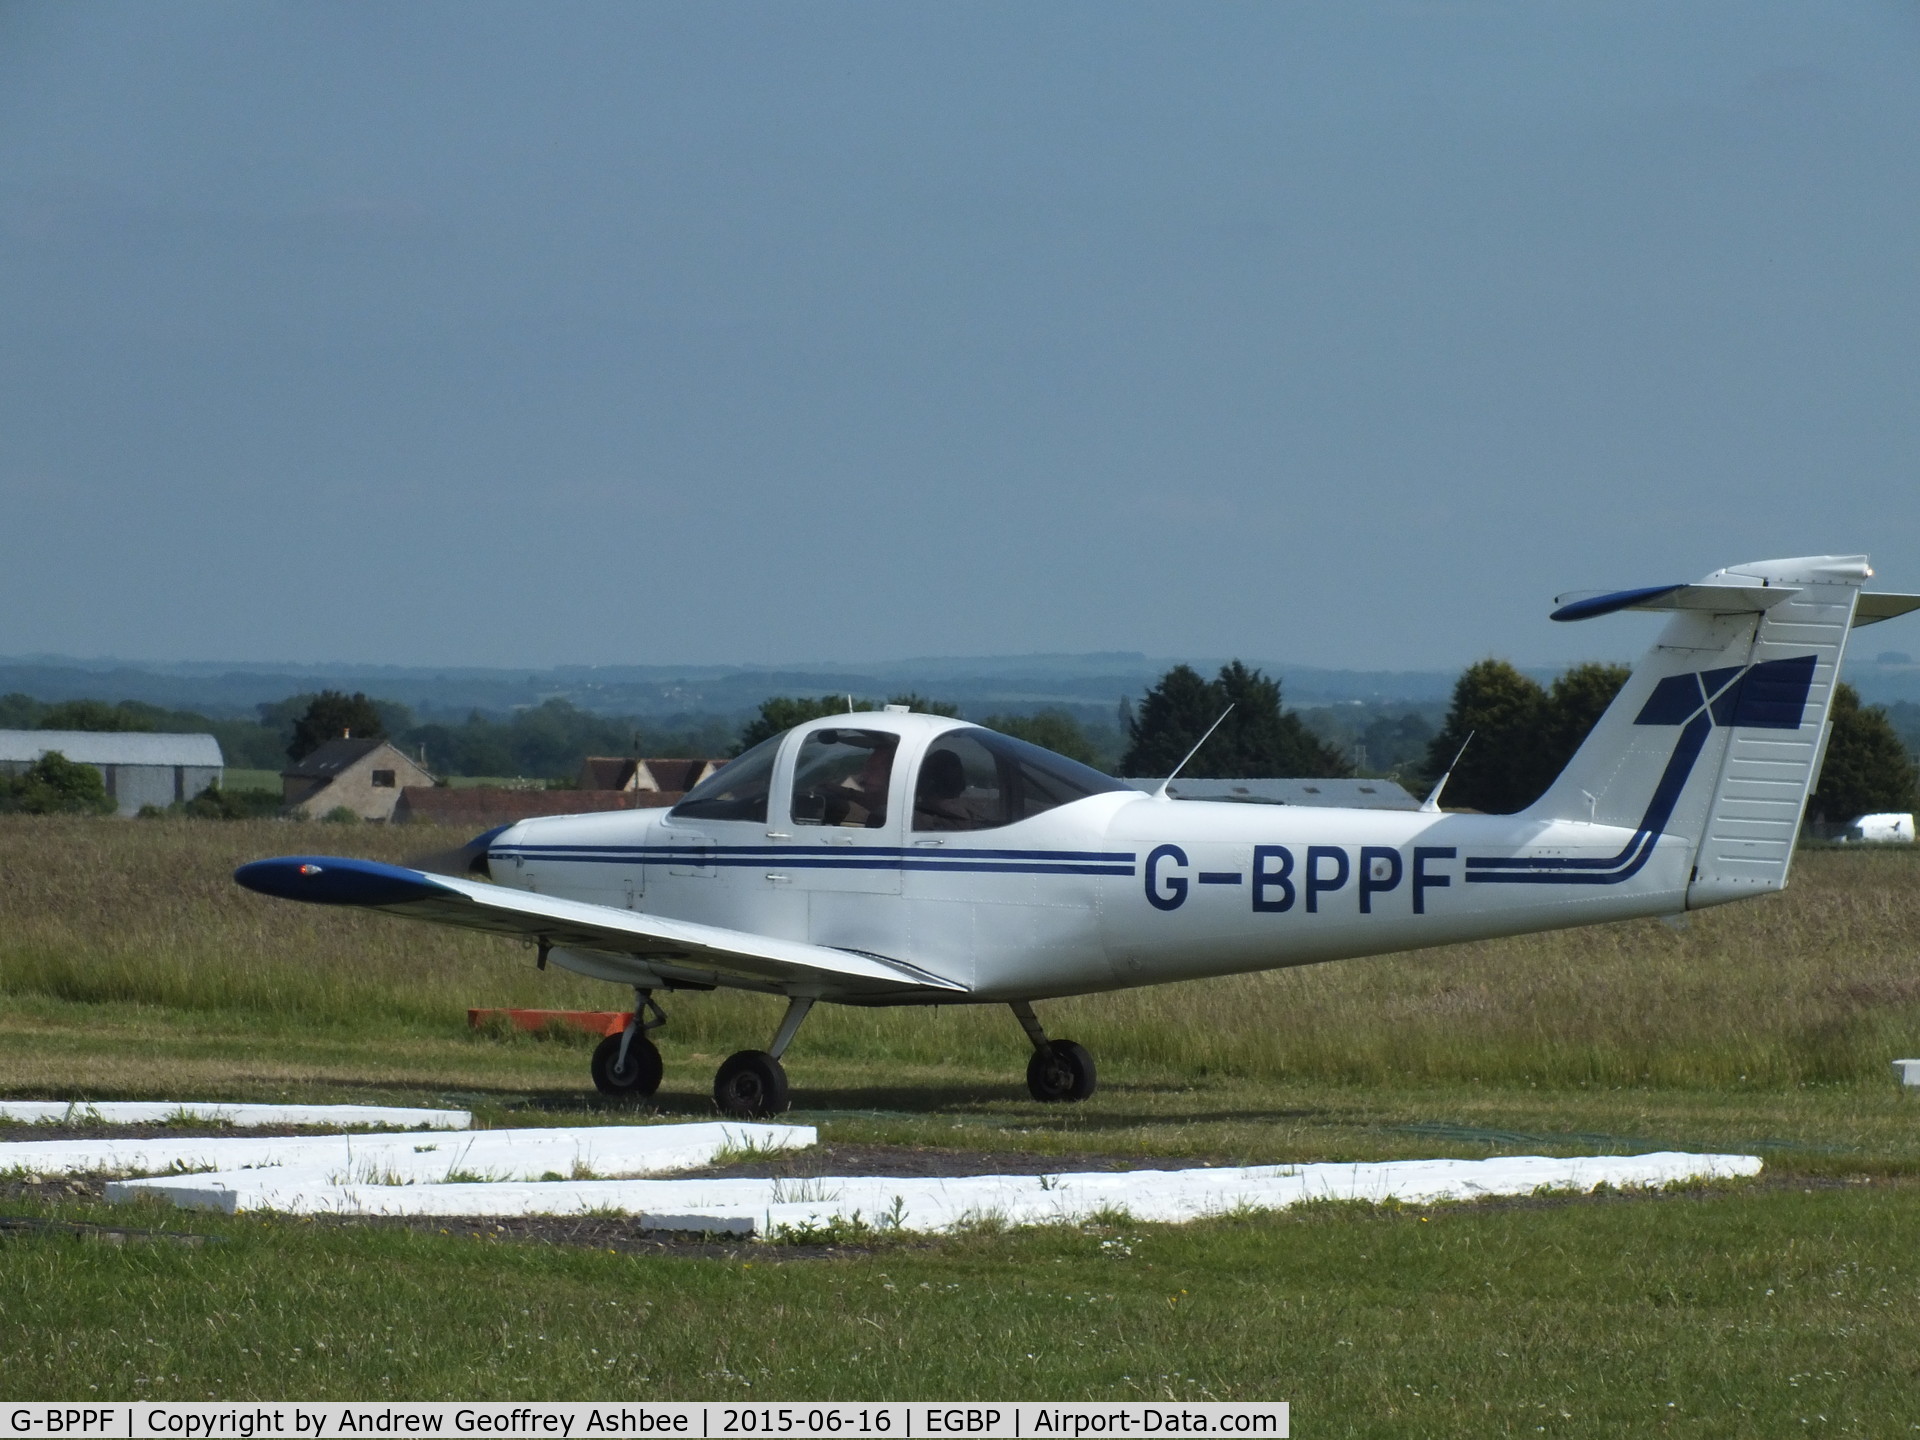 G-BPPF, 1979 Piper PA-38-112 Tomahawk Tomahawk C/N 38-79A0578, G-BPPF at Cotswold Airport.